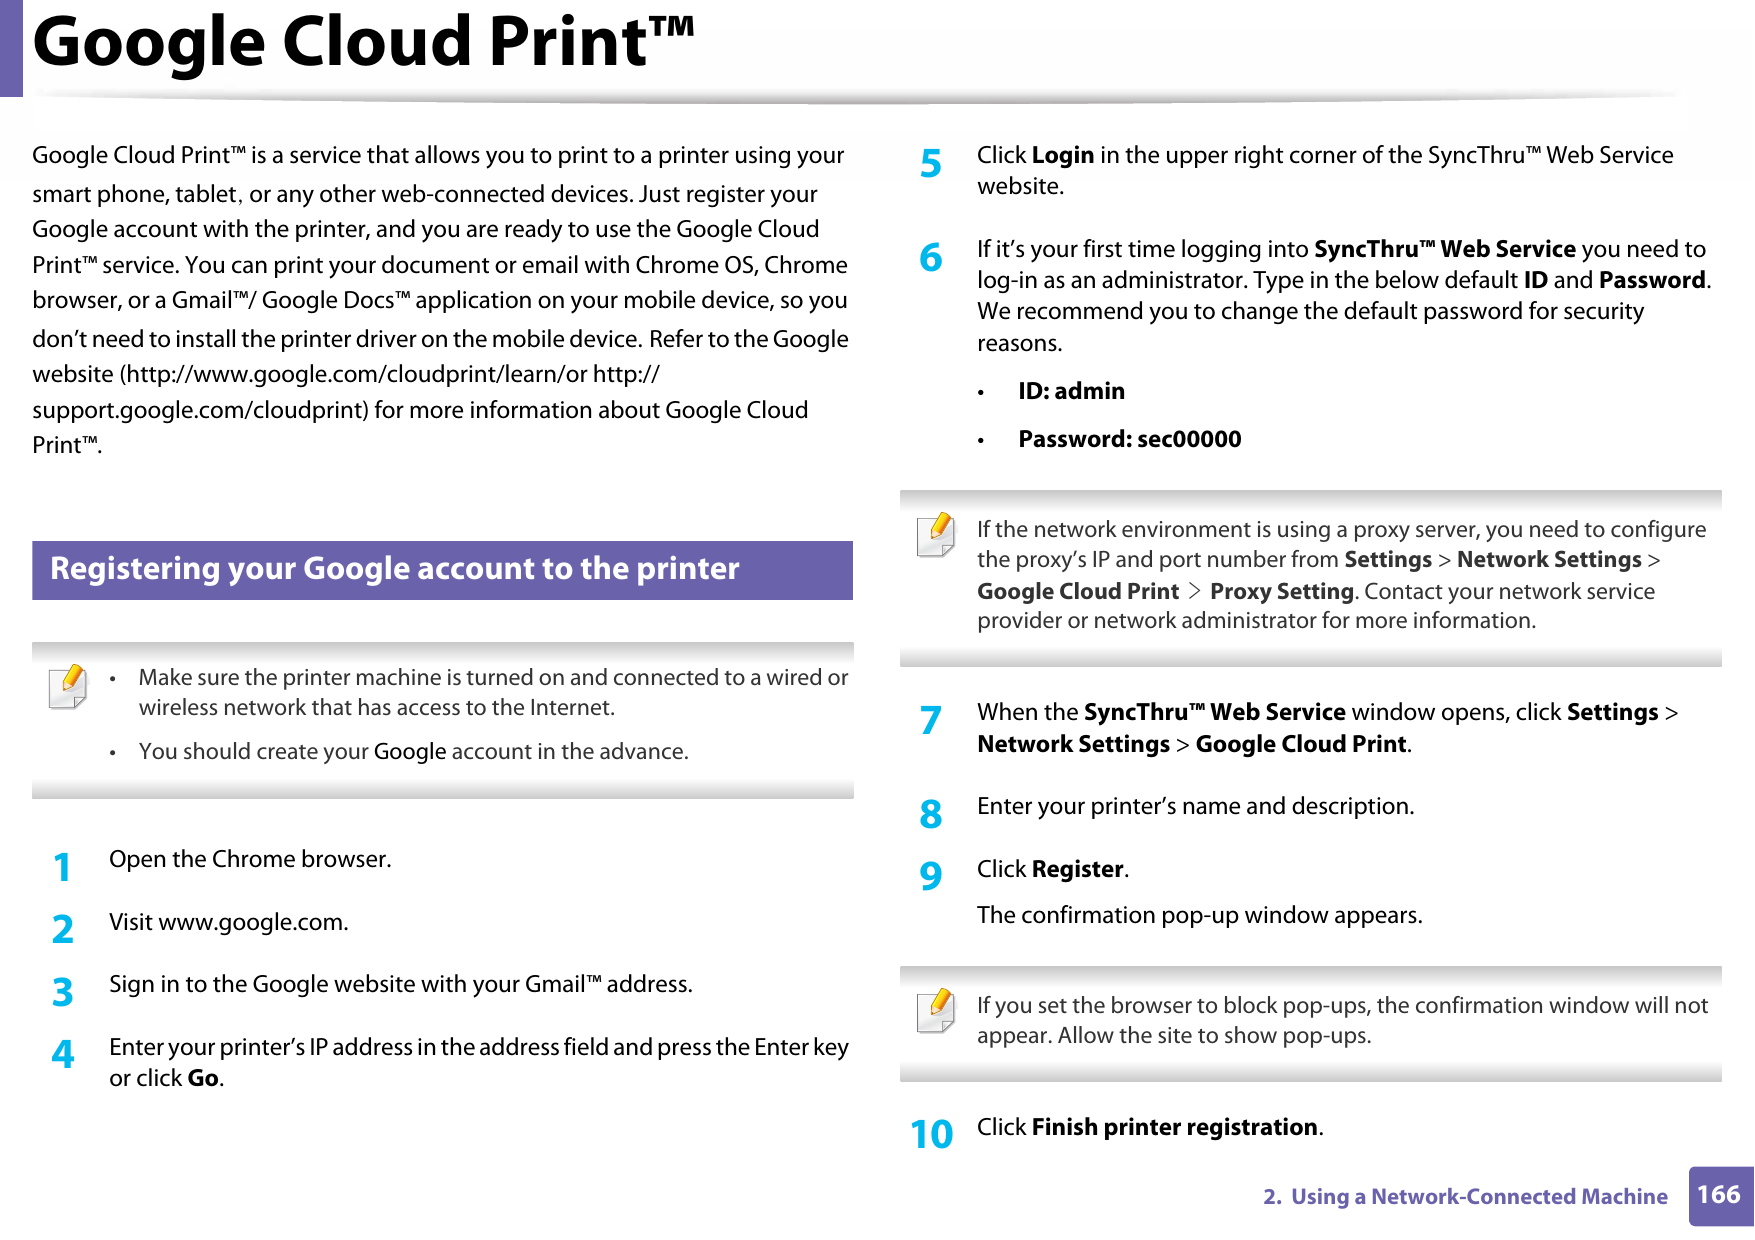 1662.  Using a Network-Connected MachineGoogle Cloud Print™Google Cloud Print™ is a service that allows you to print to a printer using your smart phone, tablet, or any other web-connected devices. Just register your Google account with the printer, and you are ready to use the Google Cloud Print™ service. You can print your document or email with Chrome OS, Chrome browser, or a Gmail™/ Google Docs™ application on your mobile device, so you don’t need to install the printer driver on the mobile device. Refer to the Google website (http://www.google.com/cloudprint/learn/or http://support.google.com/cloudprint) for more information about Google Cloud Print™.35 Registering your Google account to the printer • Make sure the printer machine is turned on and connected to a wired or wireless network that has access to the Internet.•You should create your Google account in the advance. 1Open the Chrome browser.2  Visit www.google.com.3  Sign in to the Google website with your Gmail™ address.4  Enter your printer’s IP address in the address field and press the Enter key or click Go.5  Click Login in the upper right corner of the SyncThru™ Web Service website.6  If it’s your first time logging into SyncThru™ Web Service you need to log-in as an administrator. Type in the below default ID and Password. We recommend you to change the default password for security reasons.•ID: admin•Password: sec00000  If the network environment is using a proxy server, you need to configure the proxy’s IP and port number from Settings &gt; Network Settings &gt; Google Cloud Print &gt; Proxy Setting. Contact your network service provider or network administrator for more information. 7  When the SyncThru™ Web Service window opens, click Settings &gt; Network Settings &gt; Google Cloud Print.8  Enter your printer’s name and description.9  Click Register.The confirmation pop-up window appears. If you set the browser to block pop-ups, the confirmation window will not appear. Allow the site to show pop-ups. 10  Click Finish printer registration.